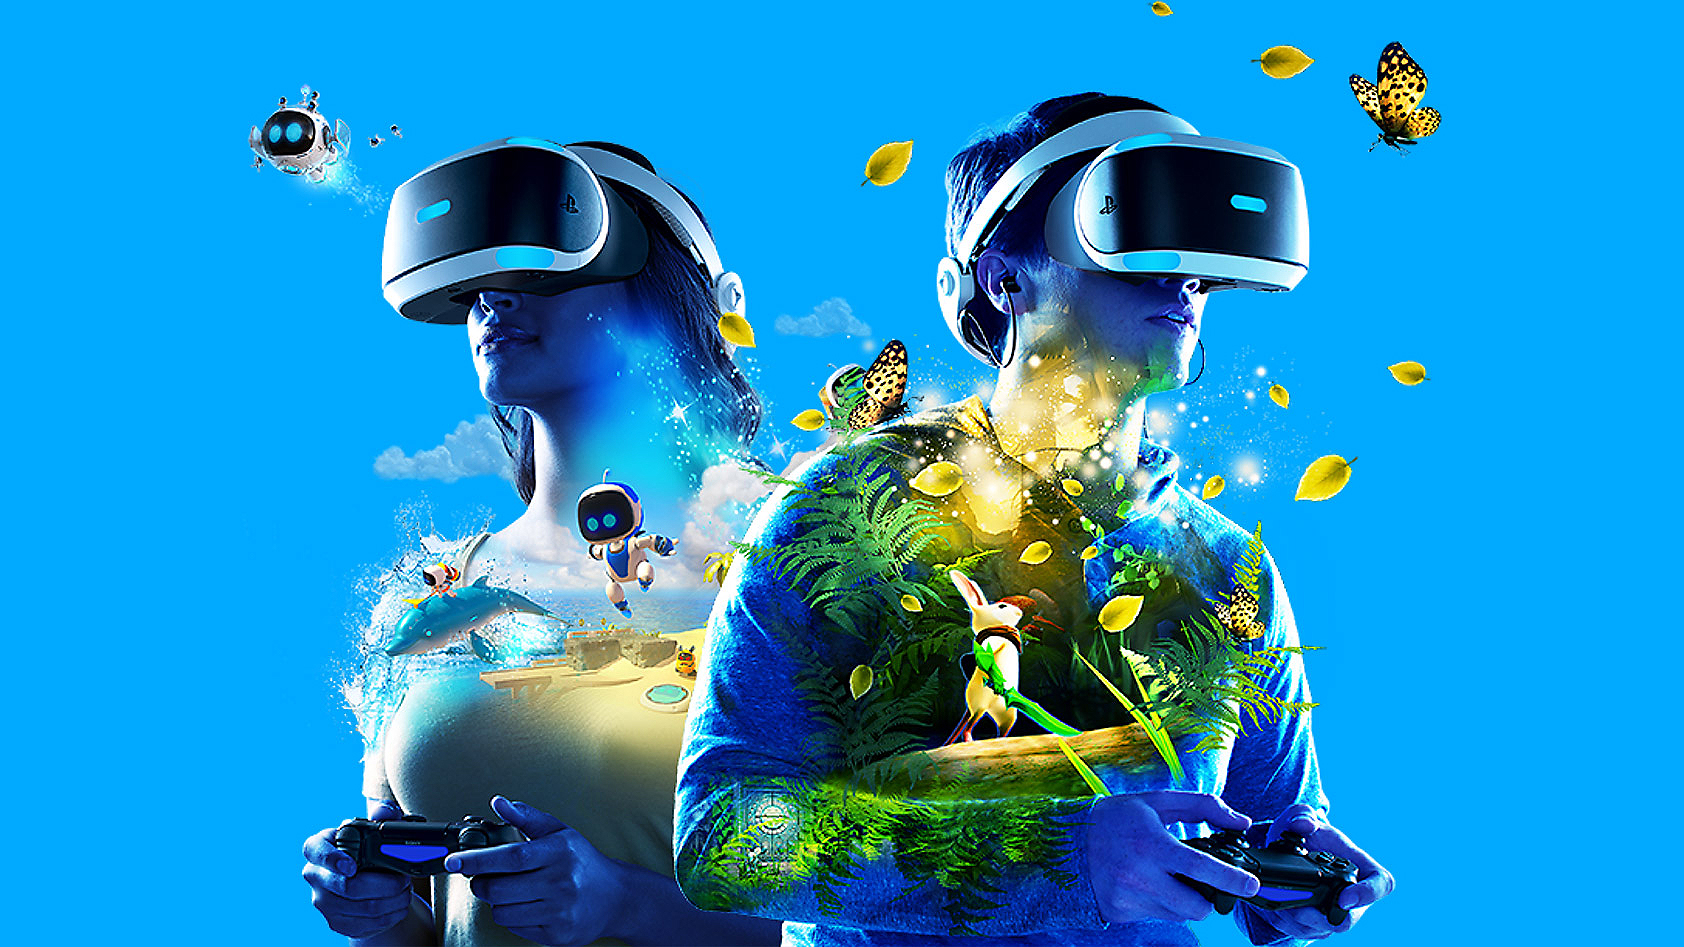 Exciting and immersive Virtual Reality games coming with Sony